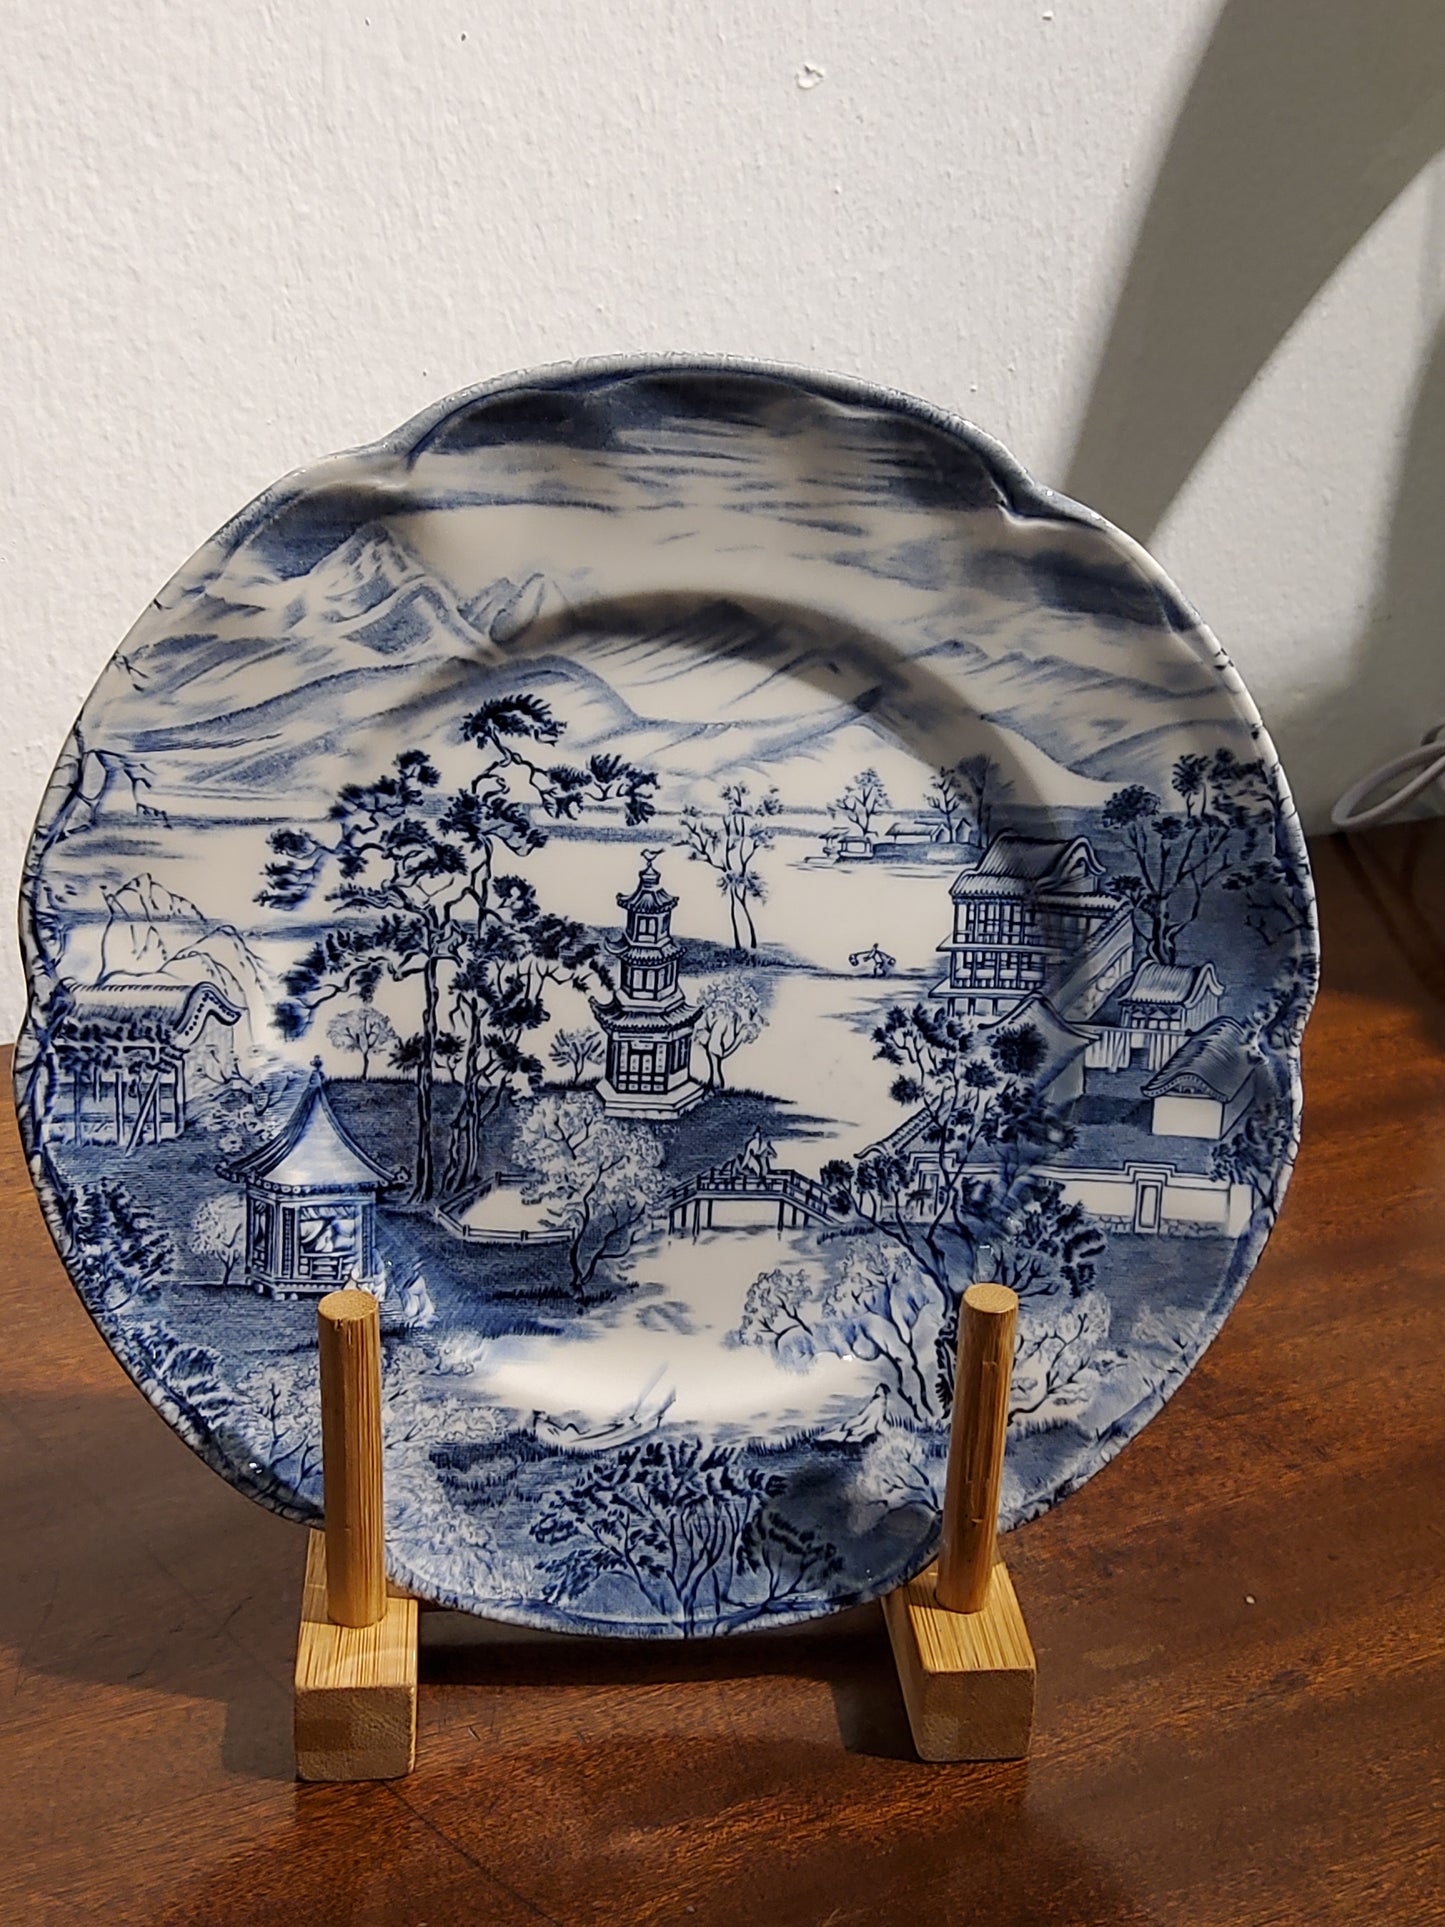 Enchanted Garden Blue by JOHNSON BROTHERS Bread & Butter plate